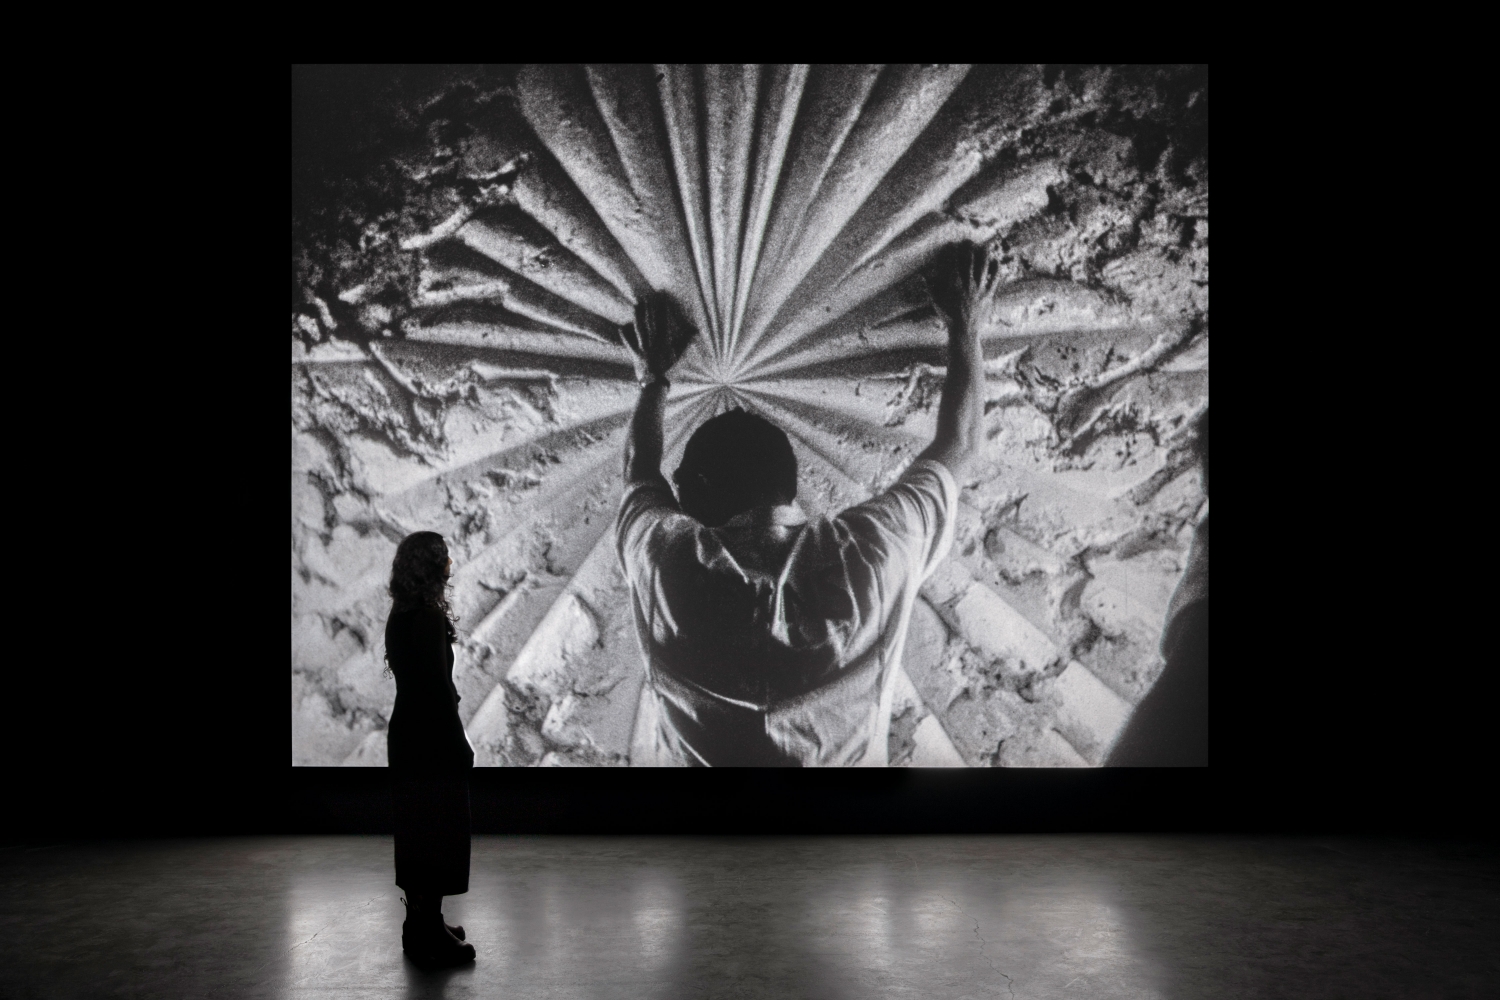 Bruce Conner & Jay DeFeo: (“we are not what we seem”)